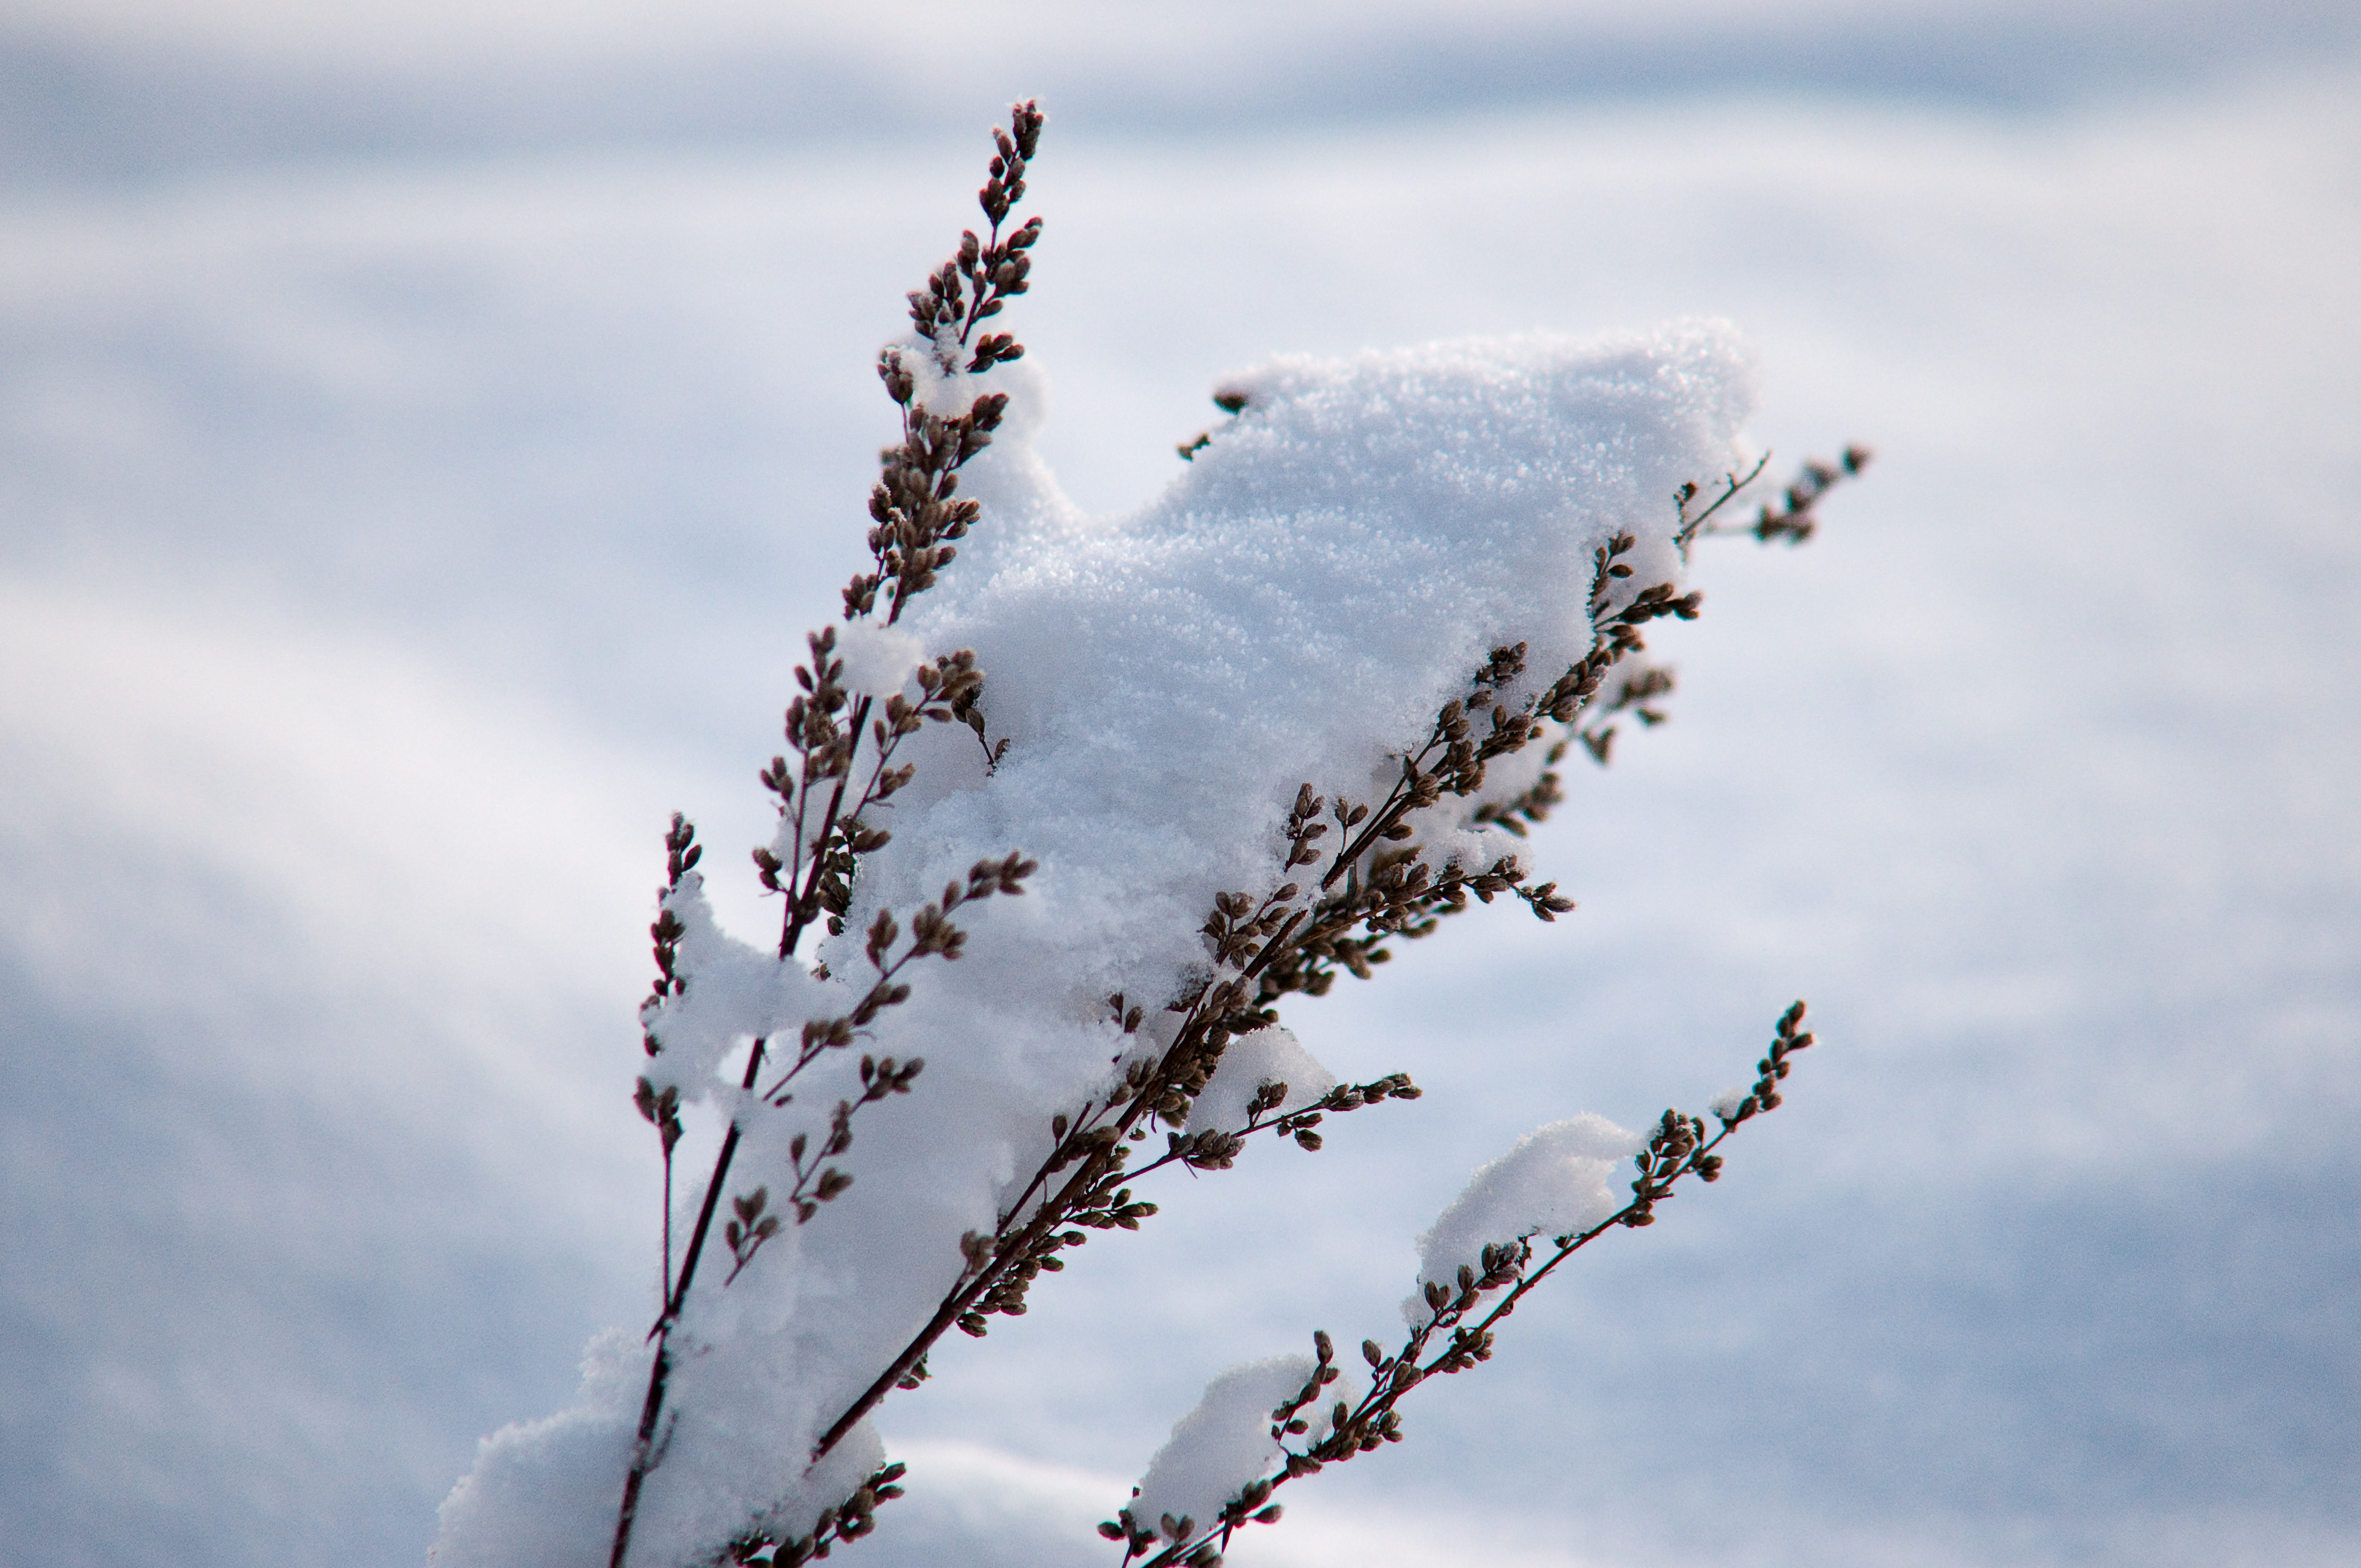 File:Norwegian winter snow covering a plant.jpg - Wikimedia Commons